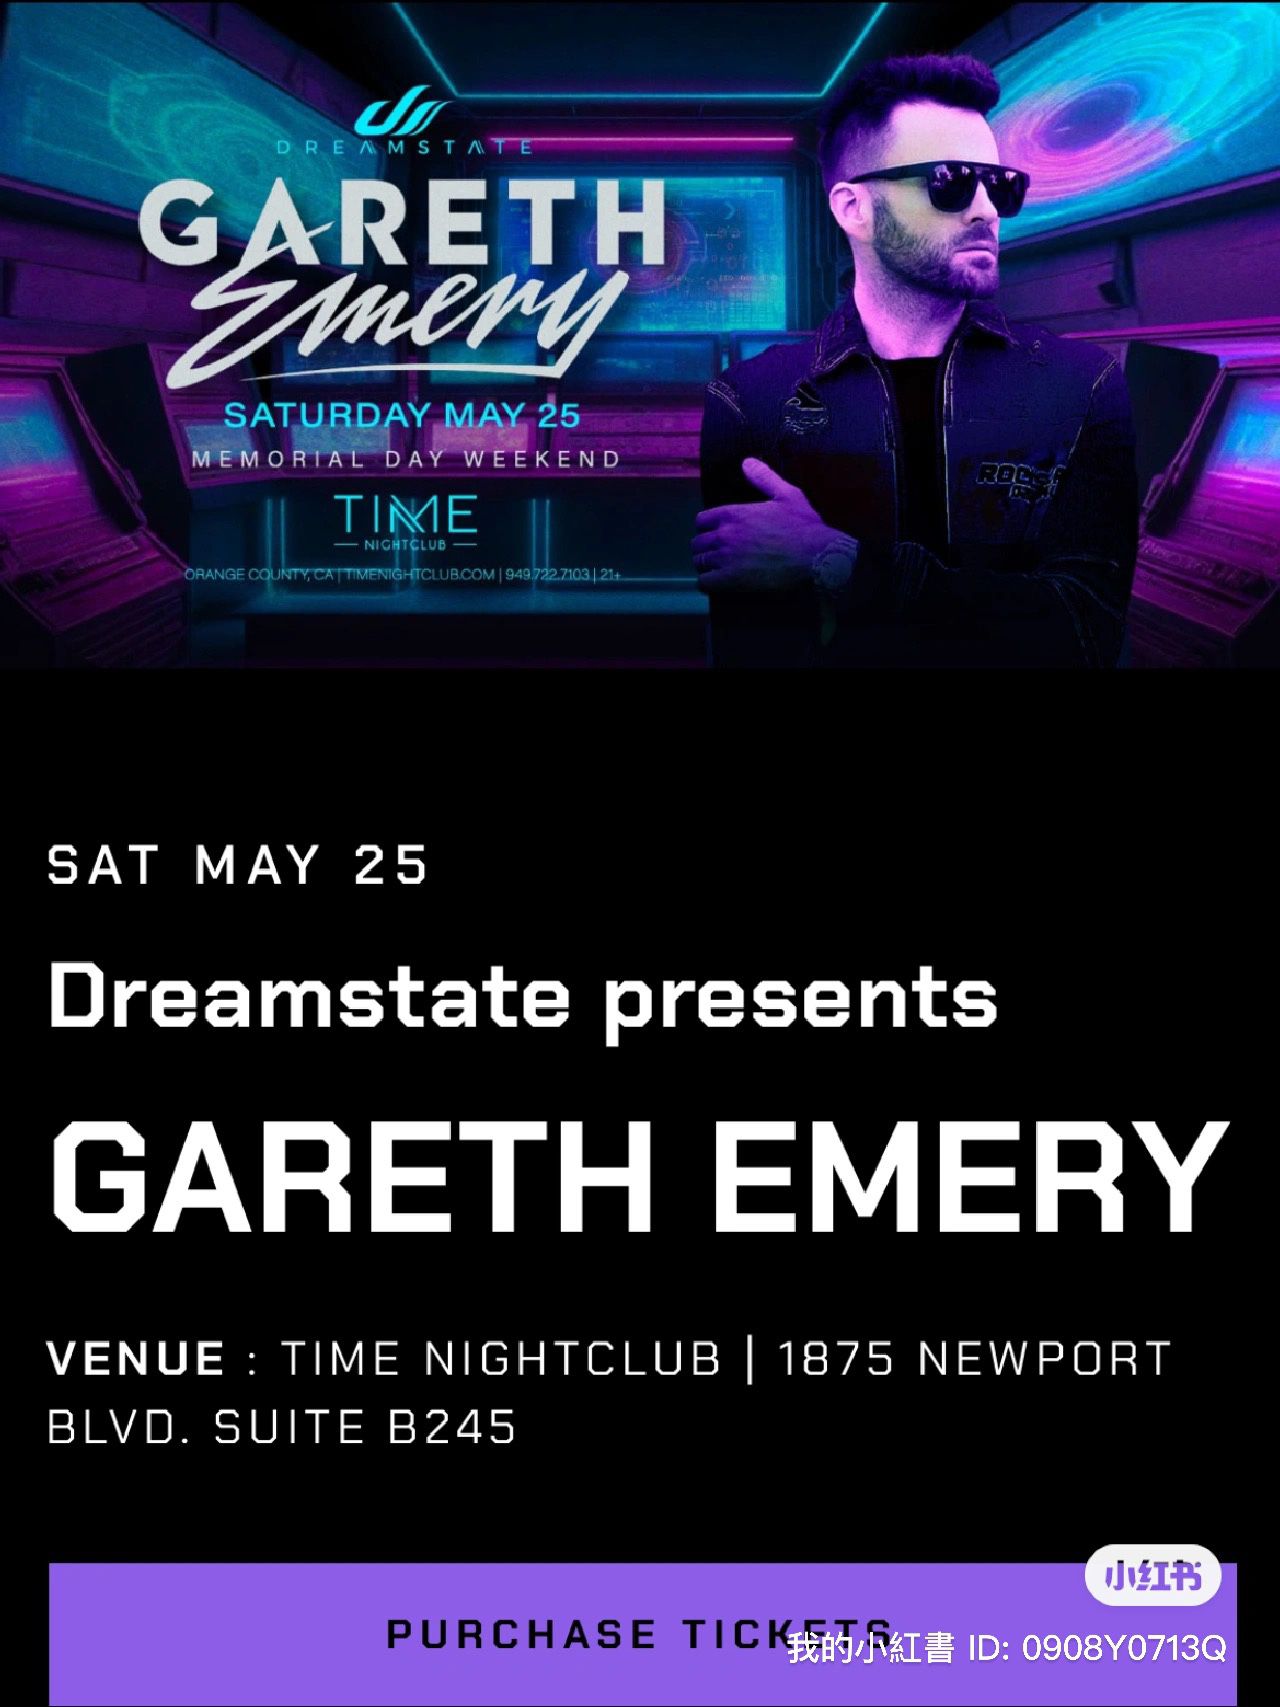 Sell one ticket for Gareth Emery 5.25, Time Club